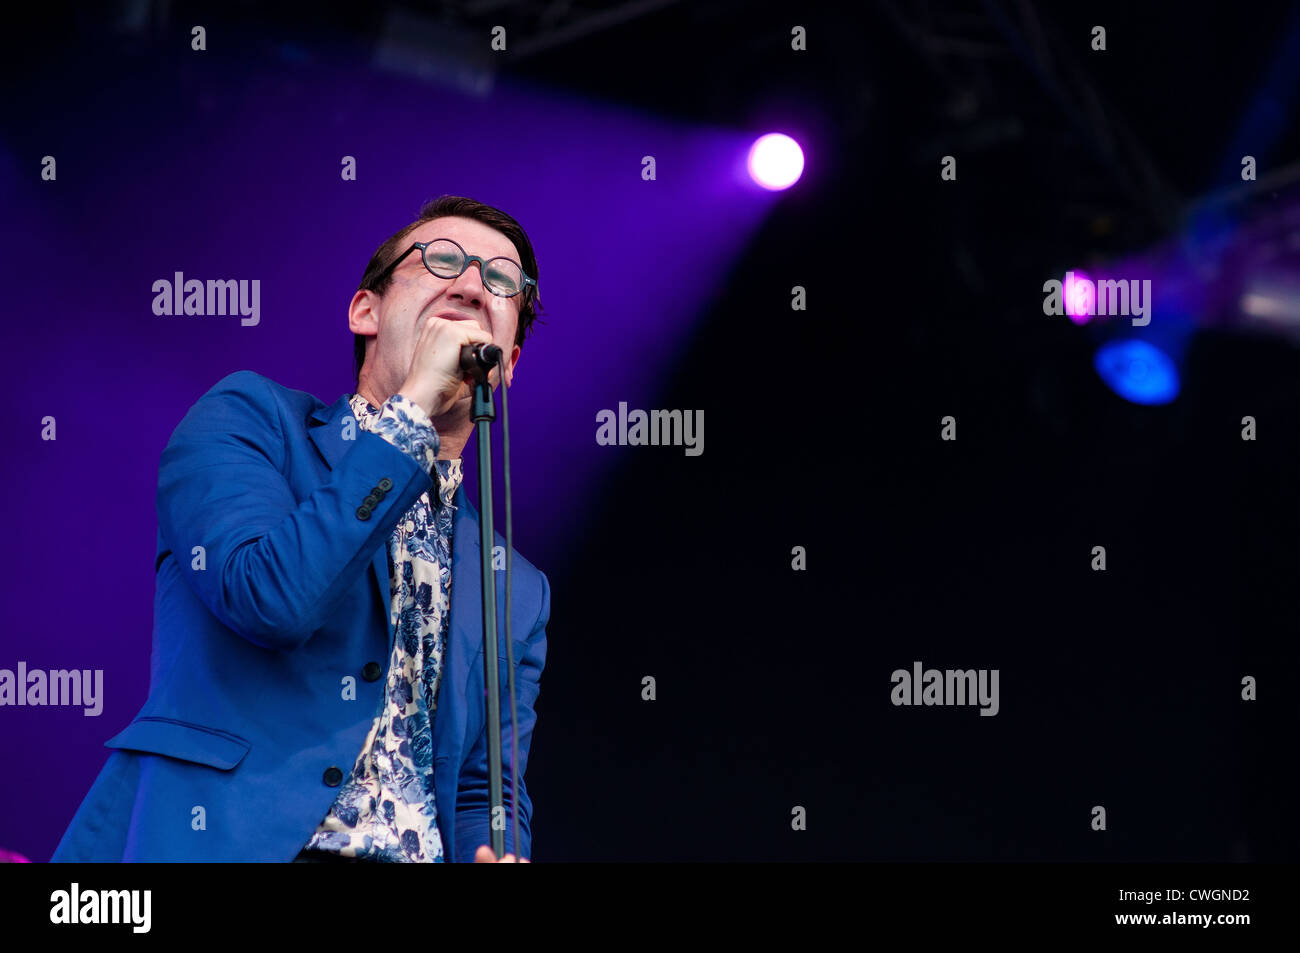 BENICASSIM, SPAIN - JULY 15: Spector band performs at FIB on July 15, 2012 in Benicassim, Spain. Stock Photo